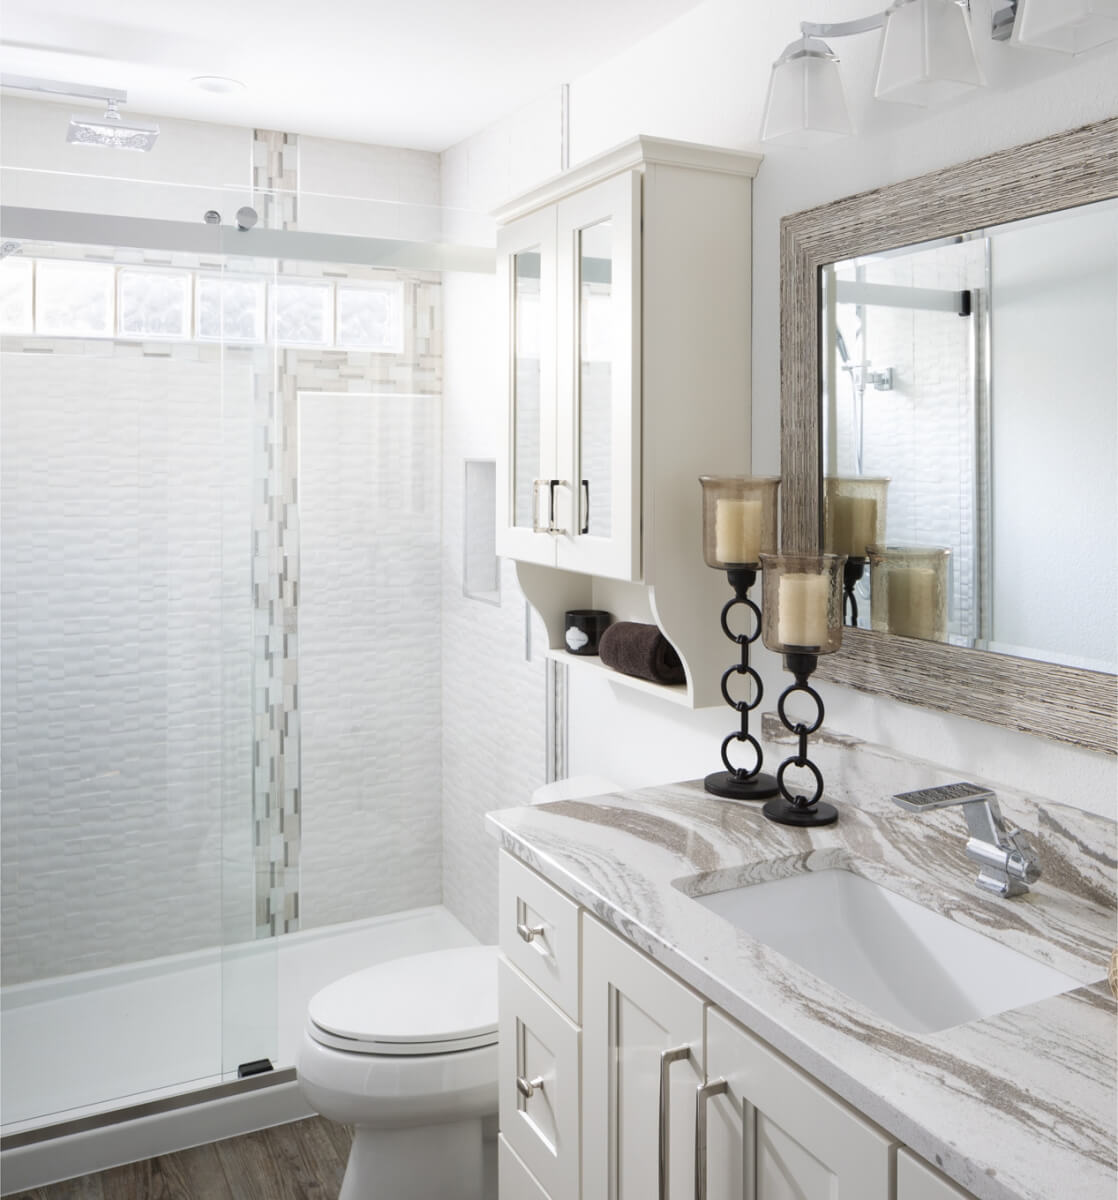 The small cabinet above the toilet in this bathroom uses mirror to help reflect more light from the small bathroom window throughout the space. Dura Supreme design by Gwen Adair of Cabinet Supreme by Adair, Wisconsin. Photography by Ryan Hainey.